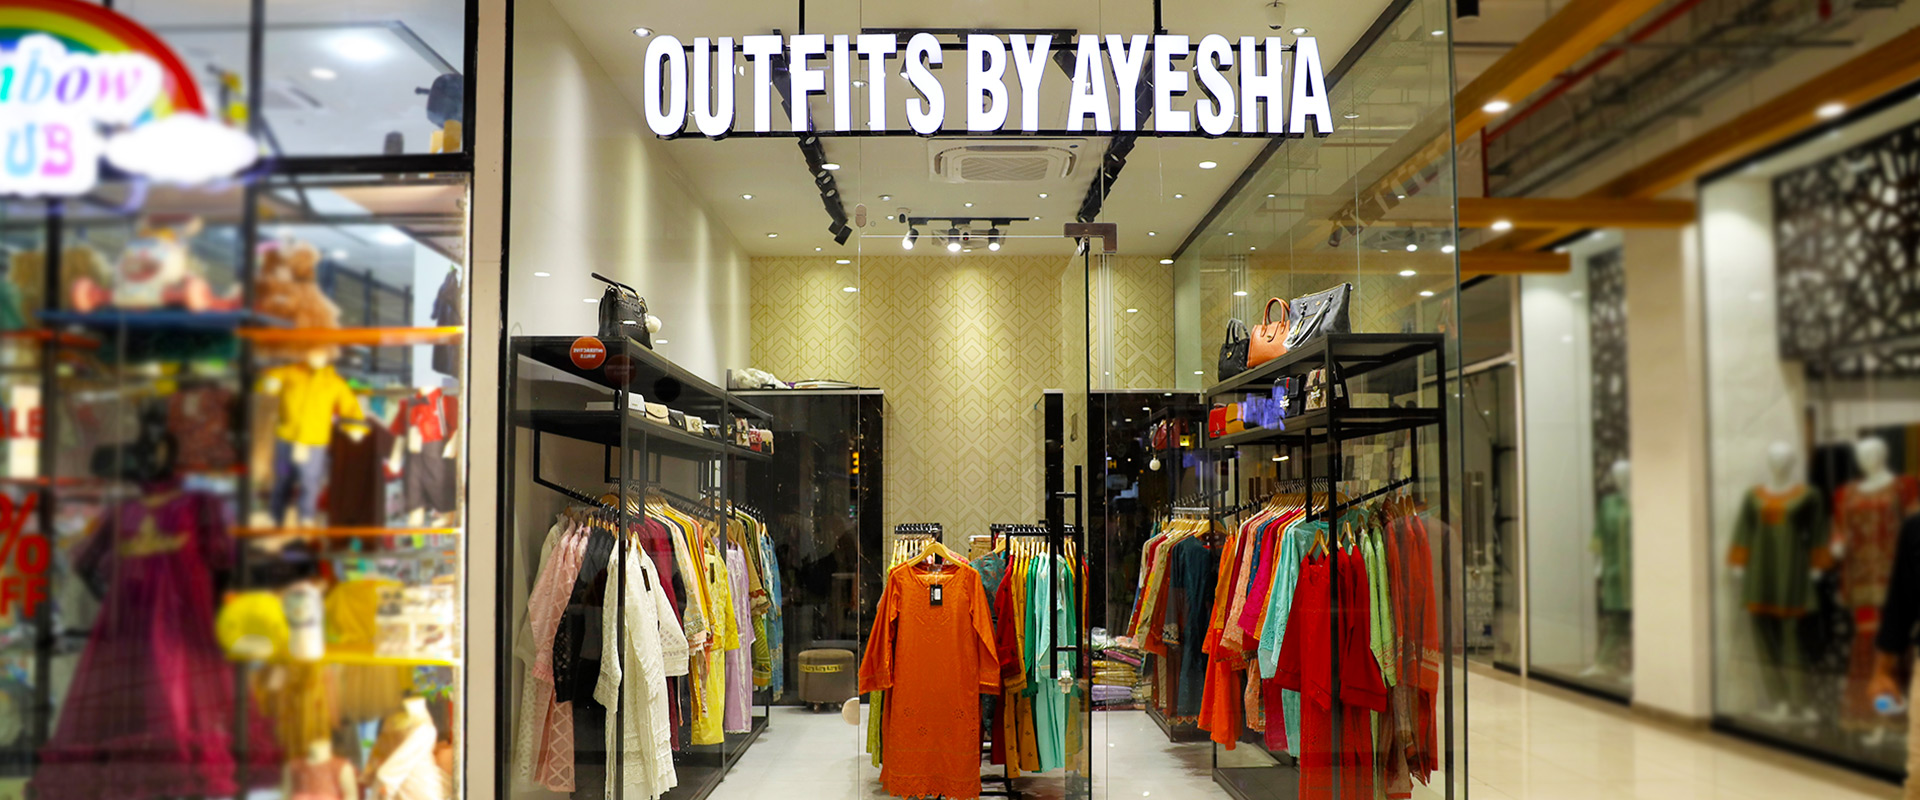 outfits-by-ayesha-1